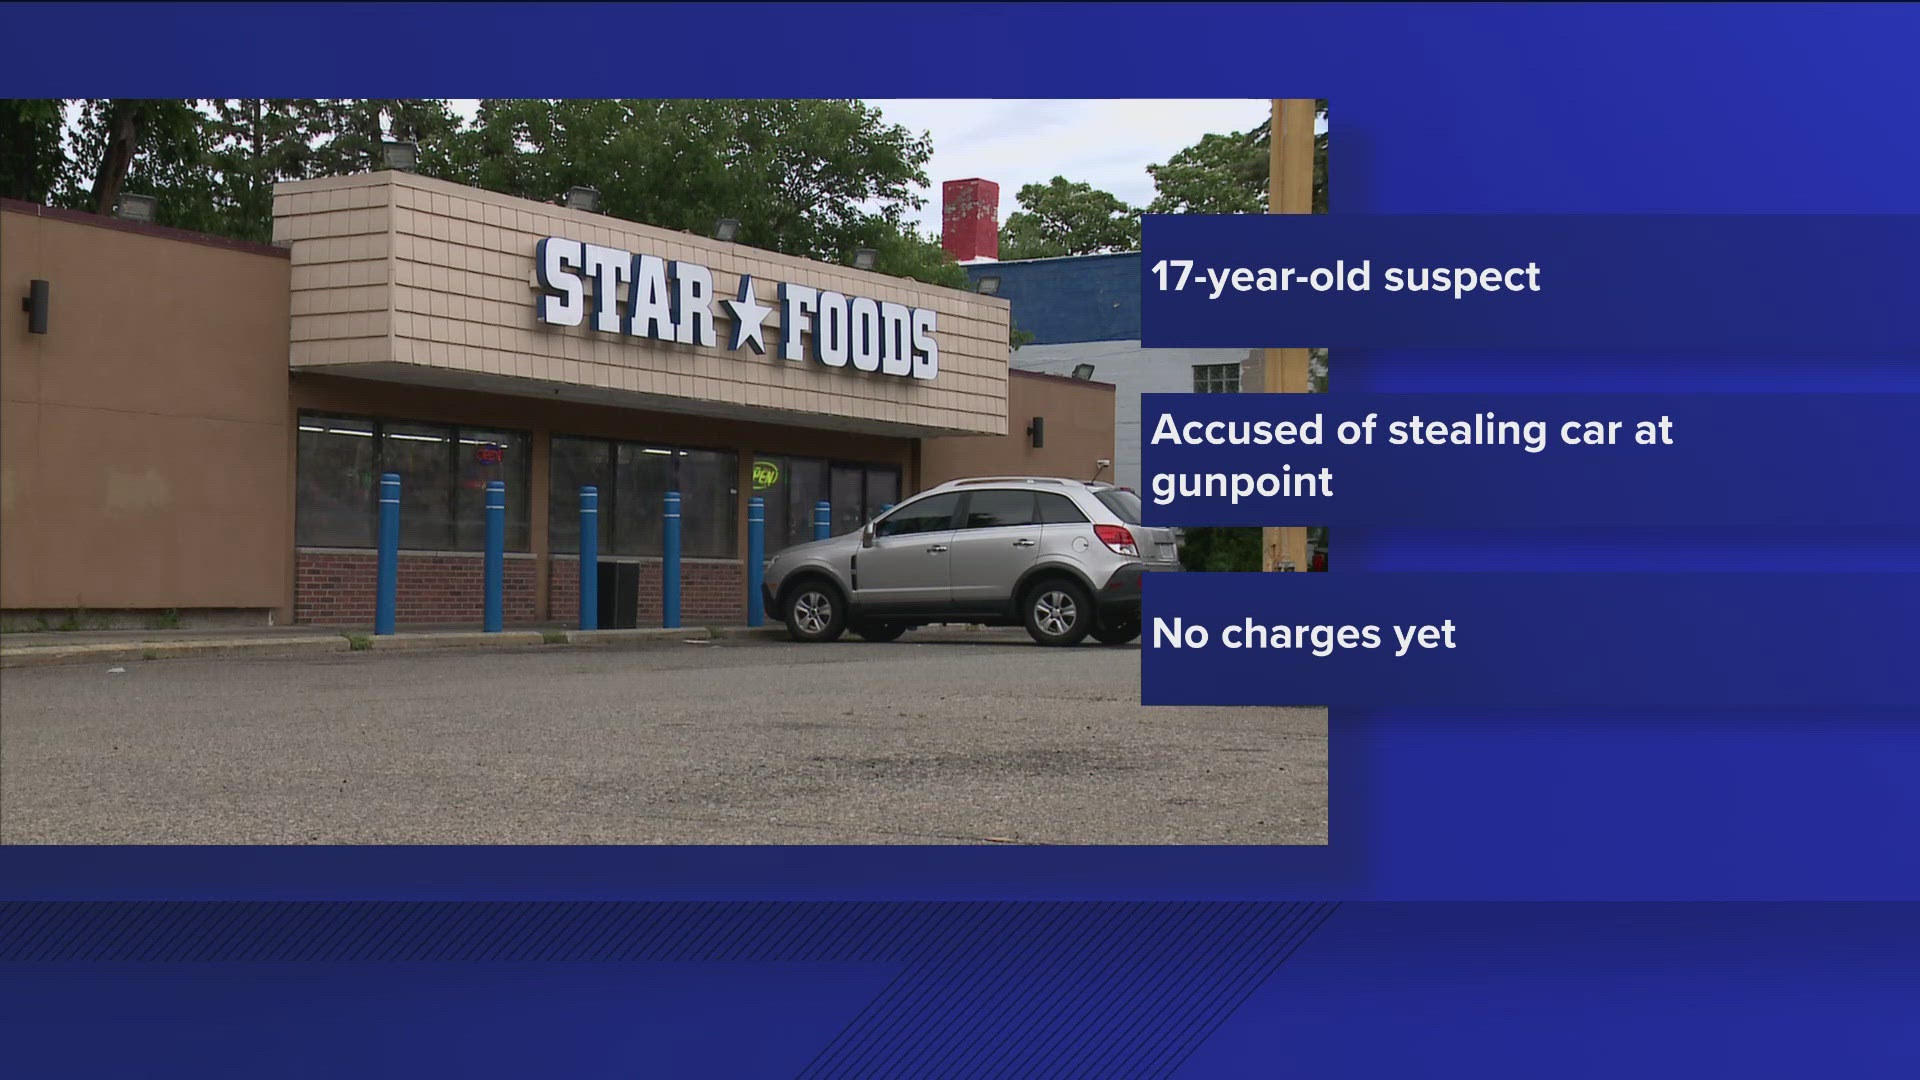 A victim reported his car stolen at gunpoint at Star Foods in North Minneapolis with the 17-year-old suspect placing an infant in the backseat before driving away.